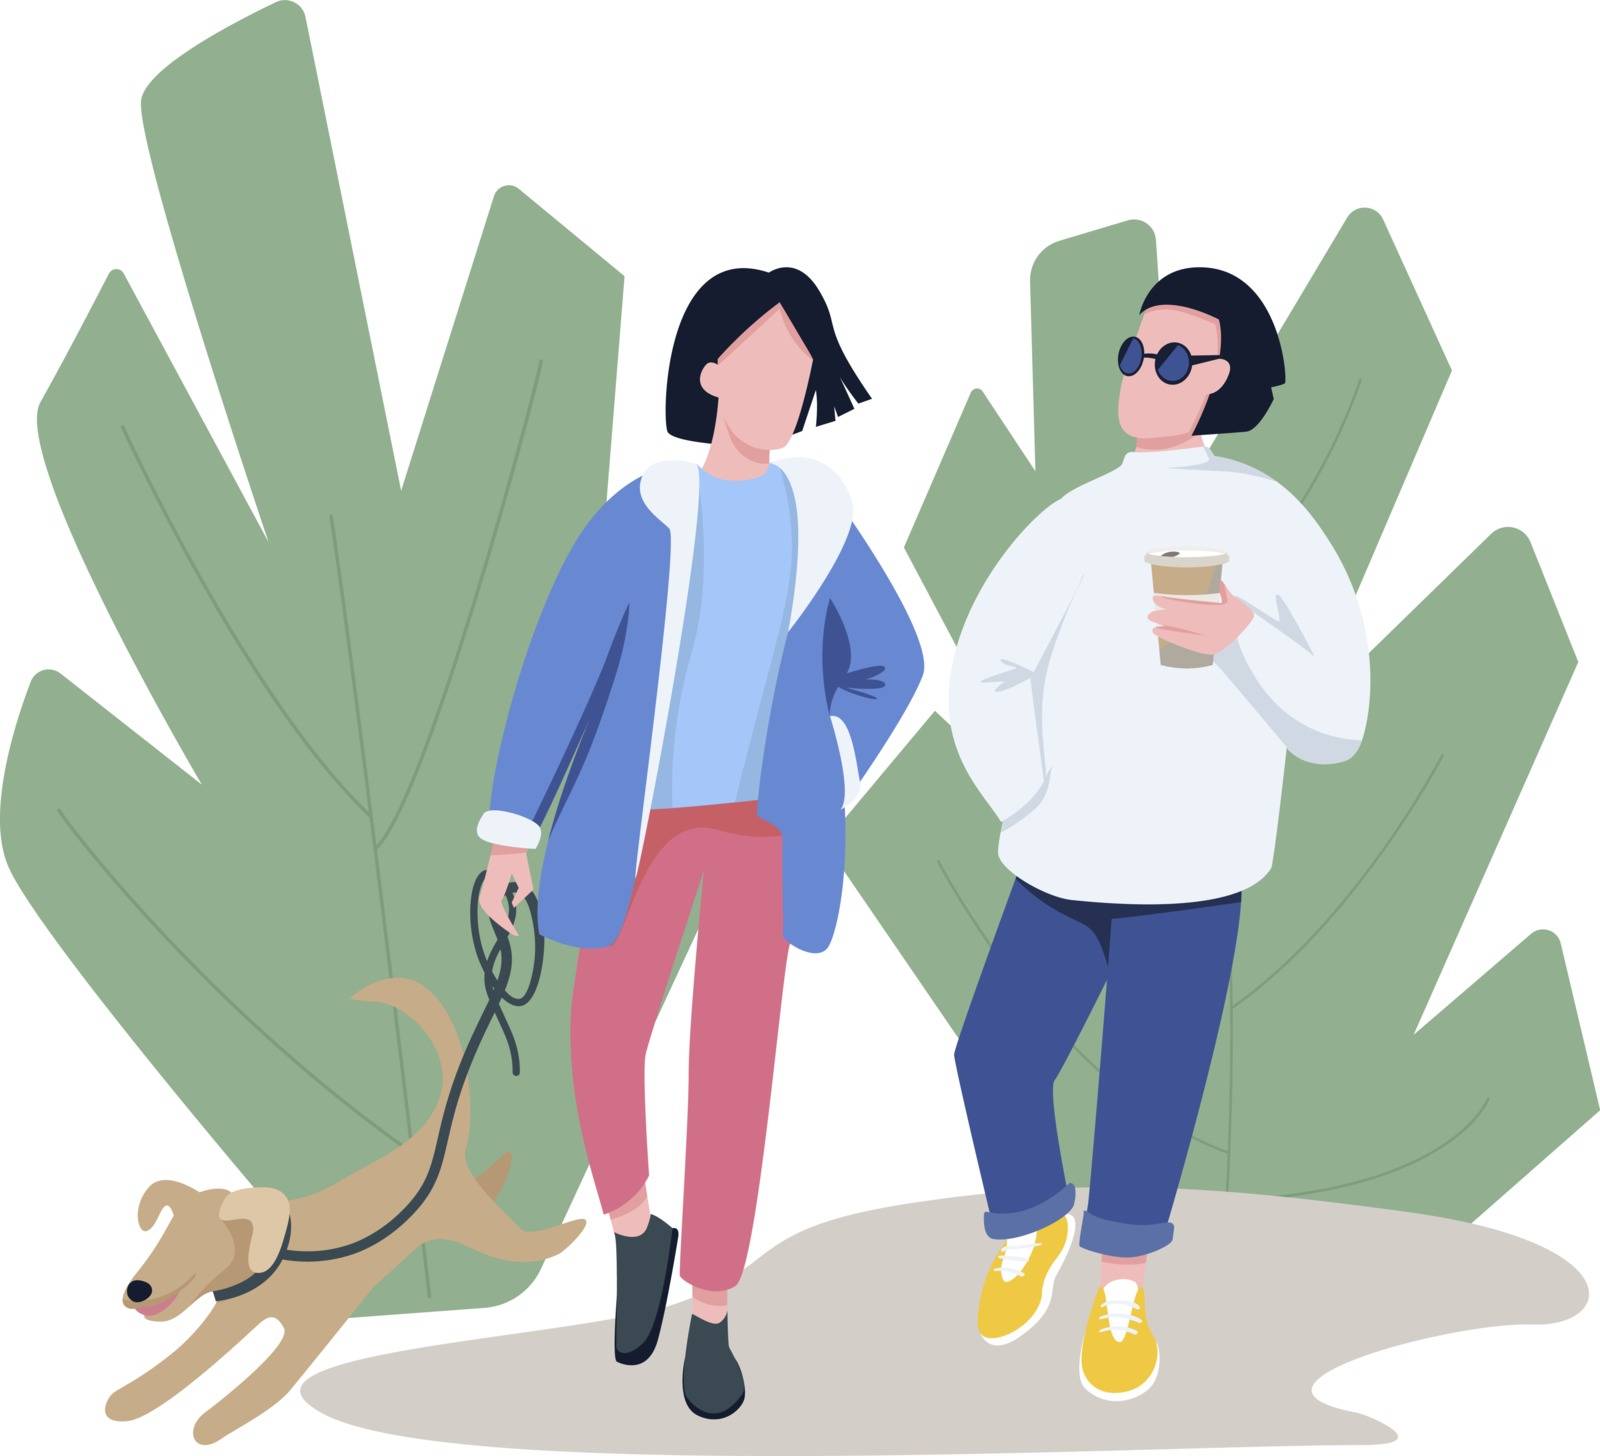 Friends walking with pet flat color vector faceless characters. Dog owner, pet lover strolling with neighbour in park isolated cartoon illustration for web graphic design and animation. ZIP file contains: EPS, JPG.